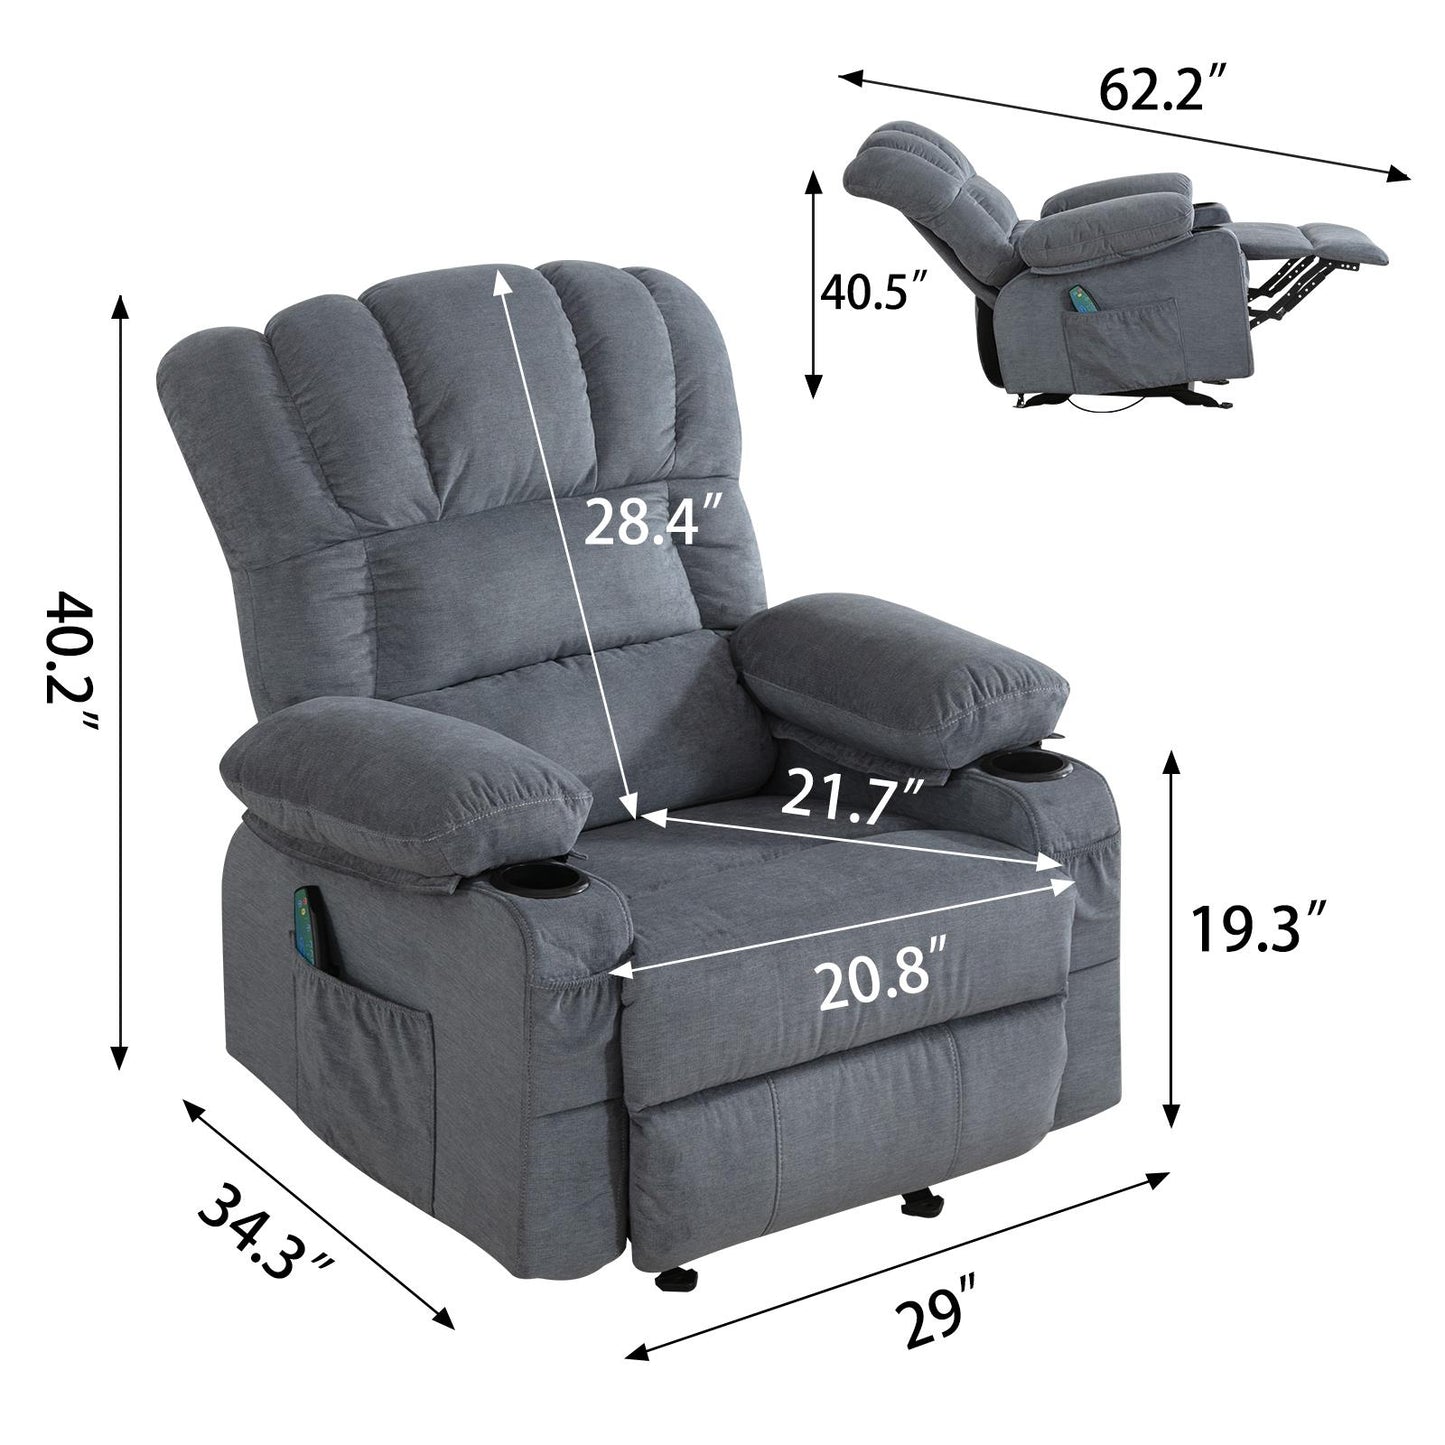 SYNGAR Manual Recliner Chair with Heat Therapy and Massage Function, Heavy Duty Reclining Mechanism Massage Chair, Elderly Single Rocker Sofa with Cup Holders for Bedroom Home Theater, Brown